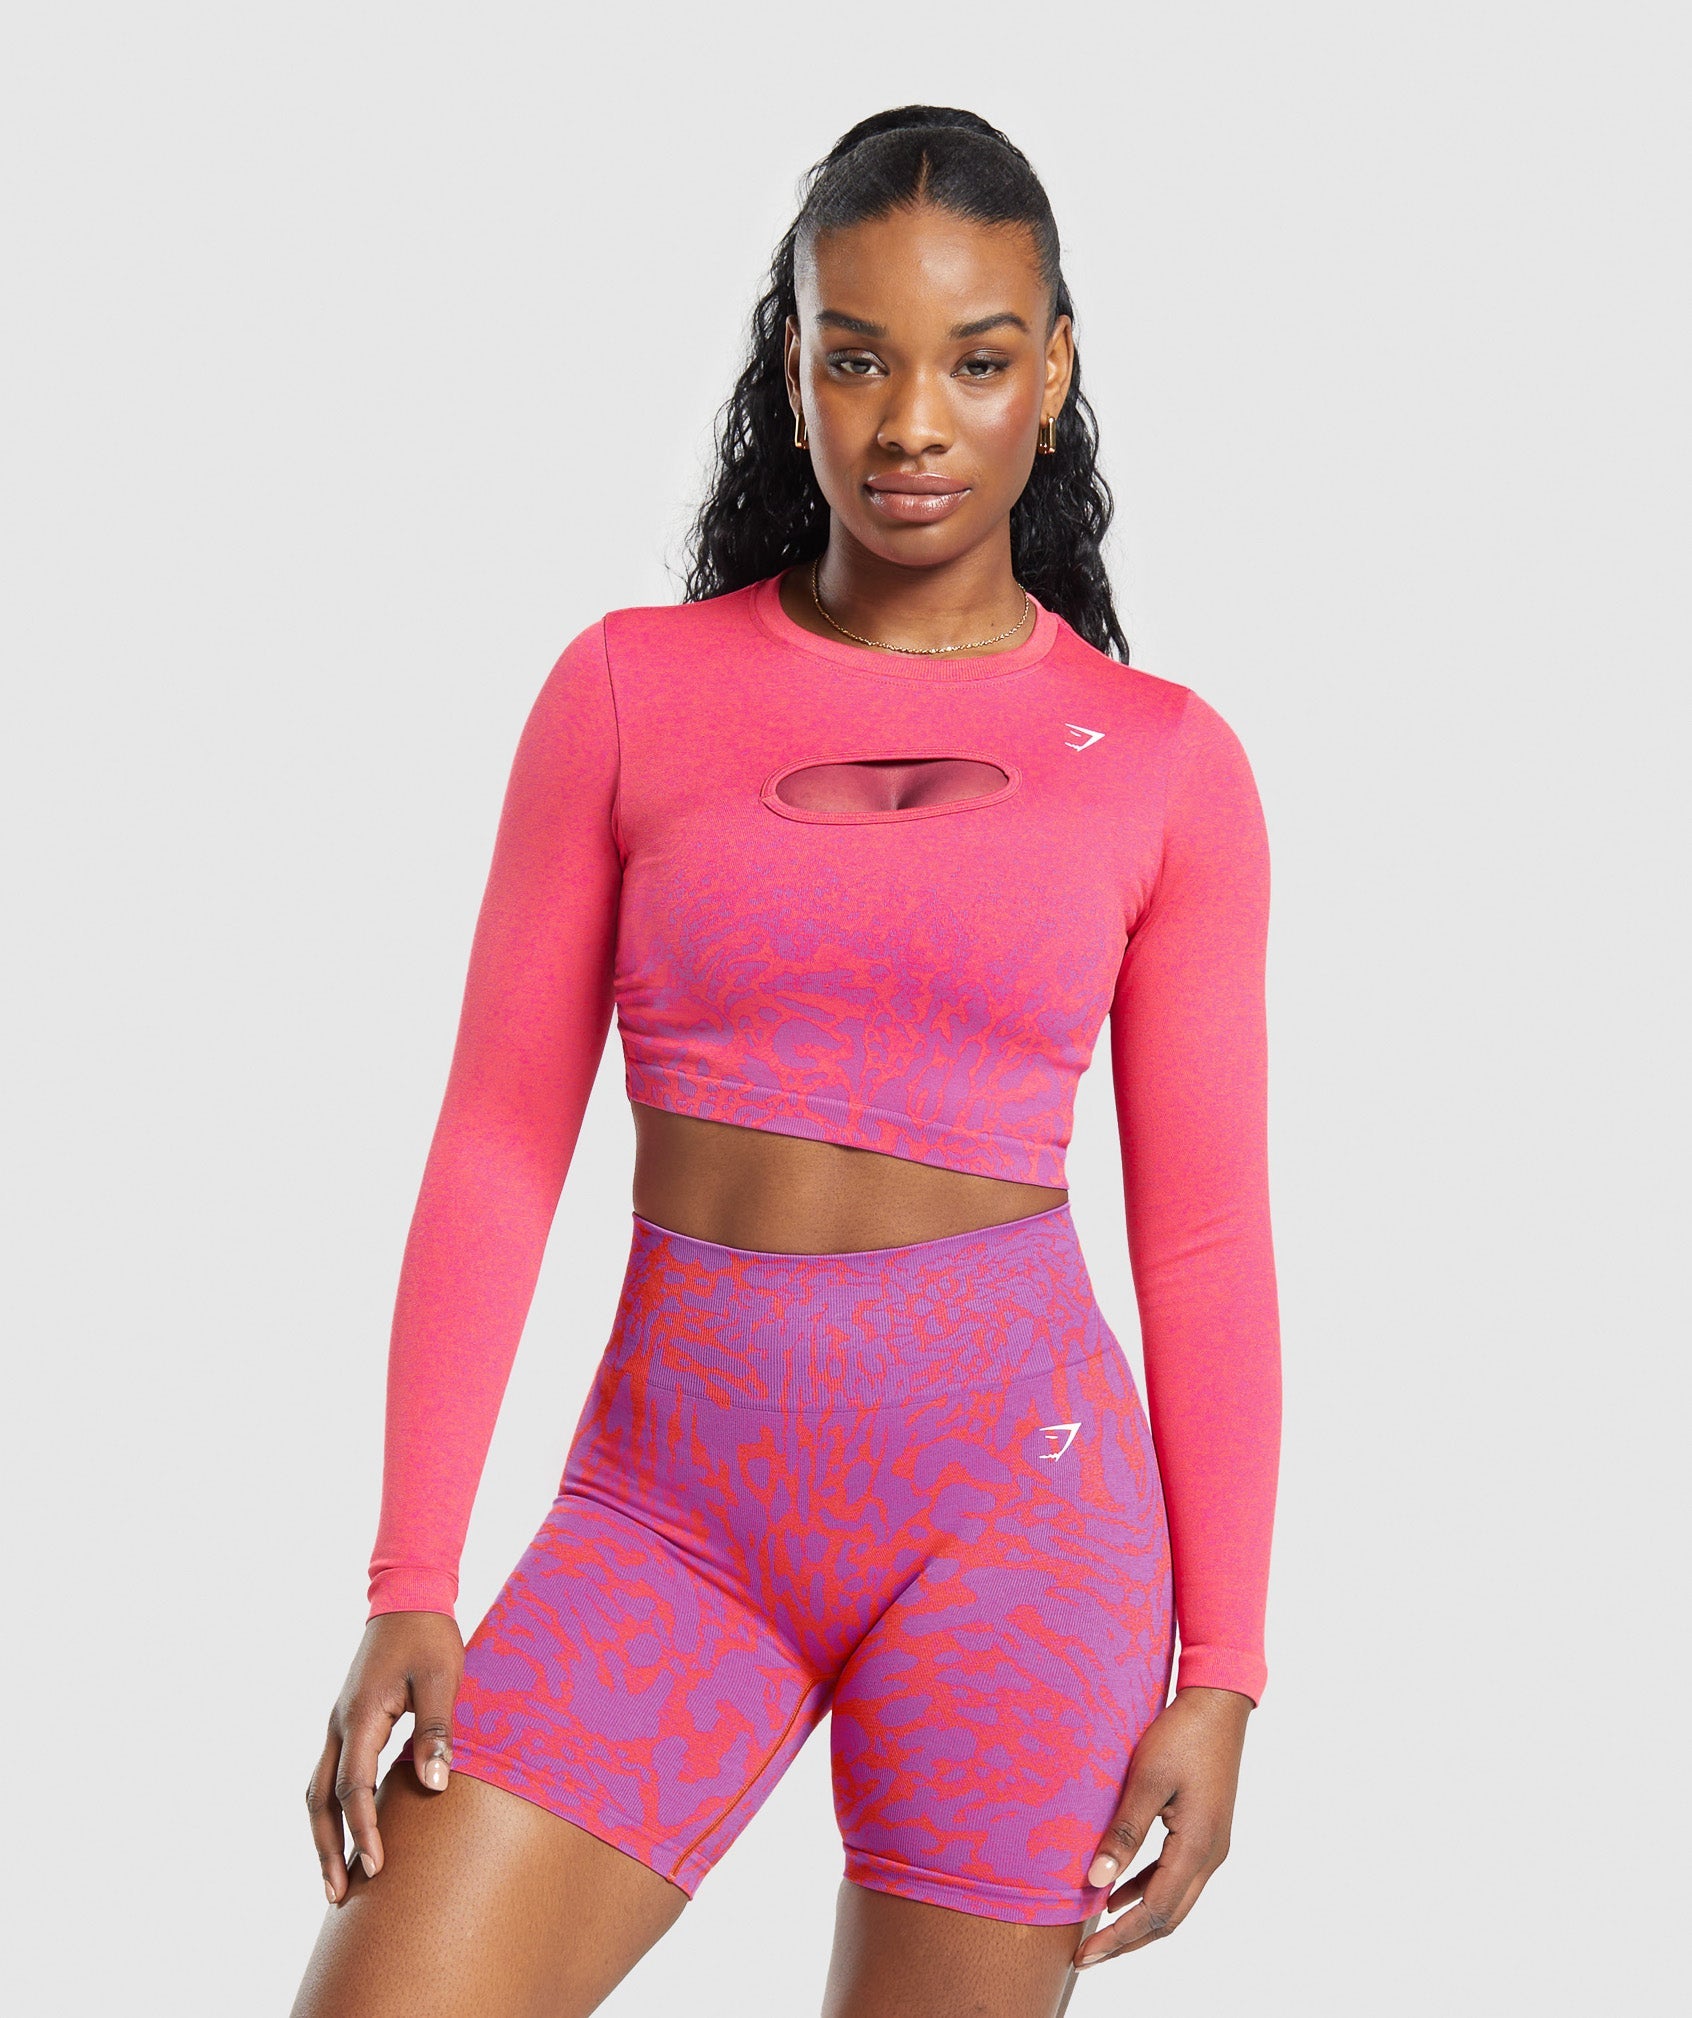 Adapt Safari Seamless Faded Long Sleeve Top in Shelly Pink/Fly Coral - view 1